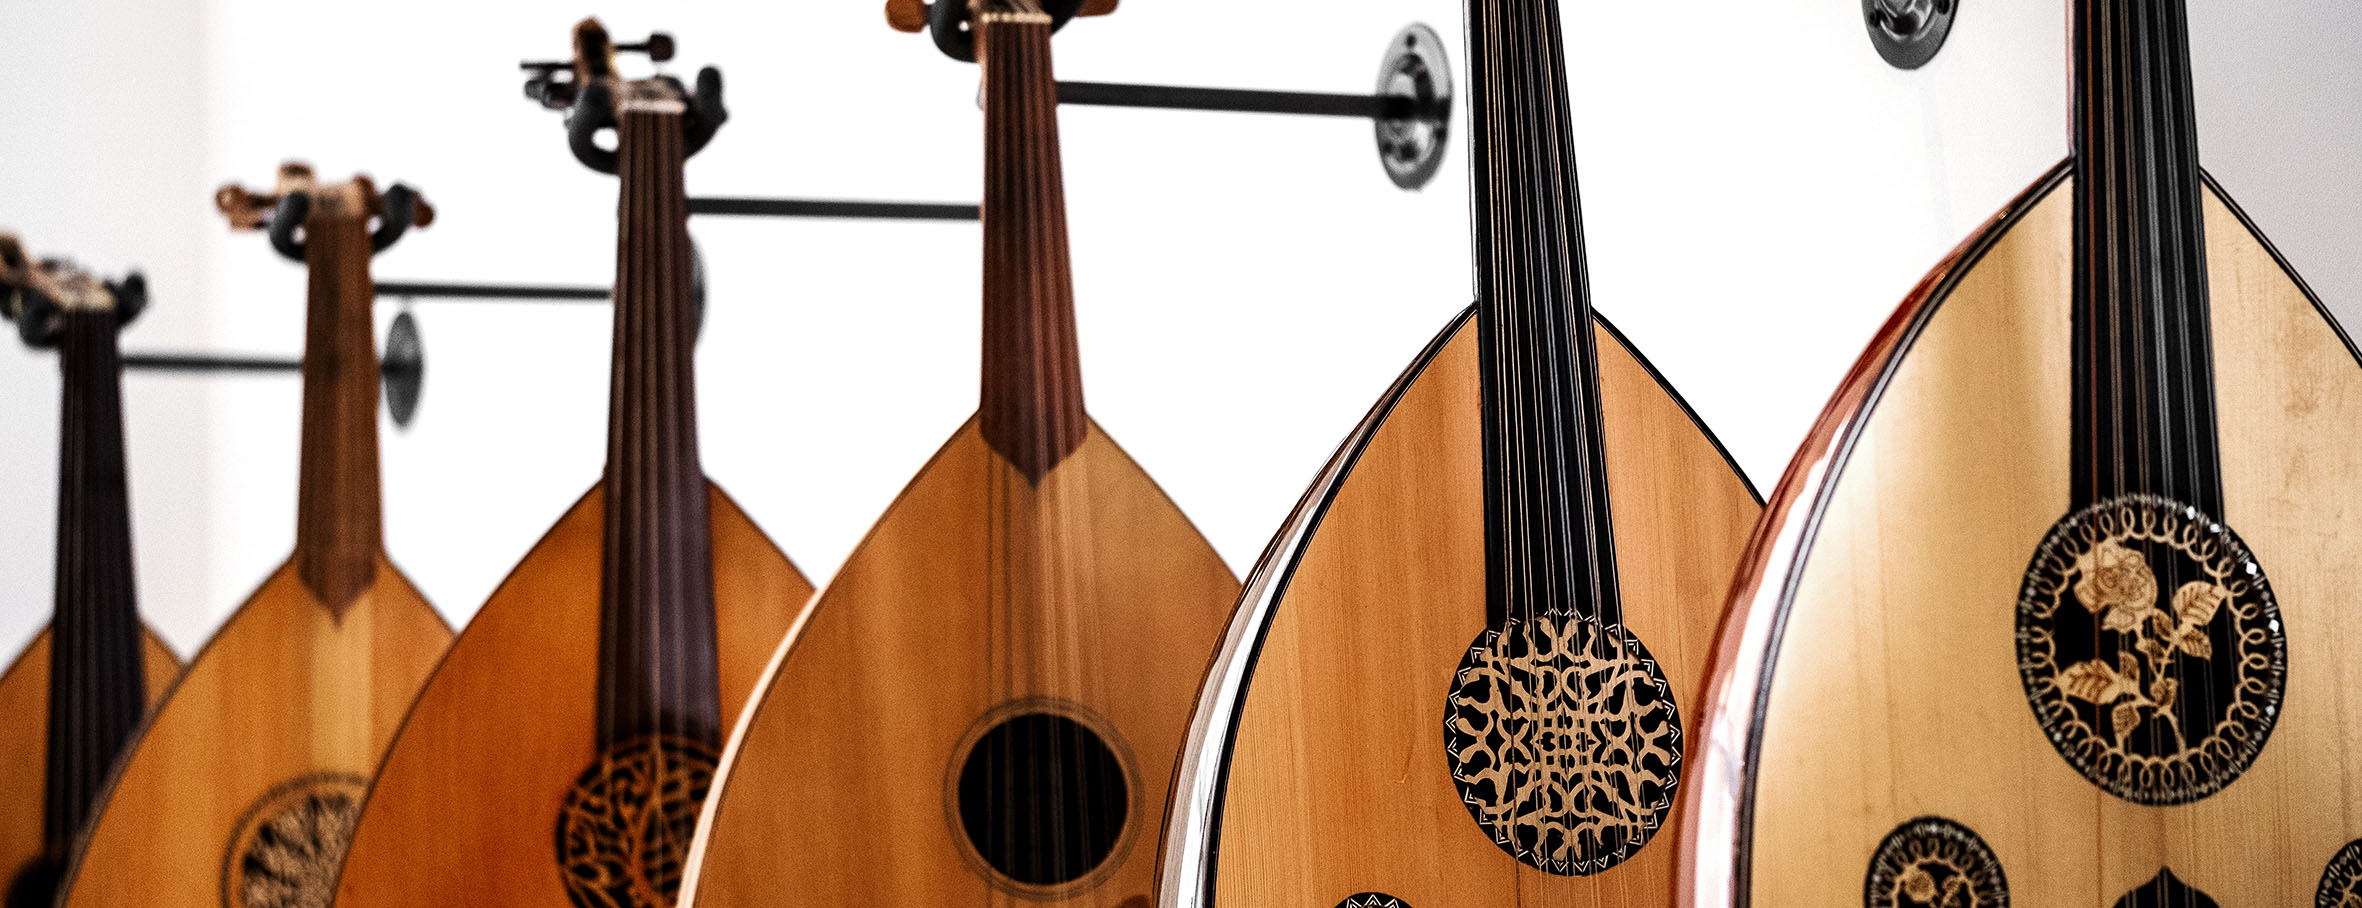 The Oud: history of the musical instrument